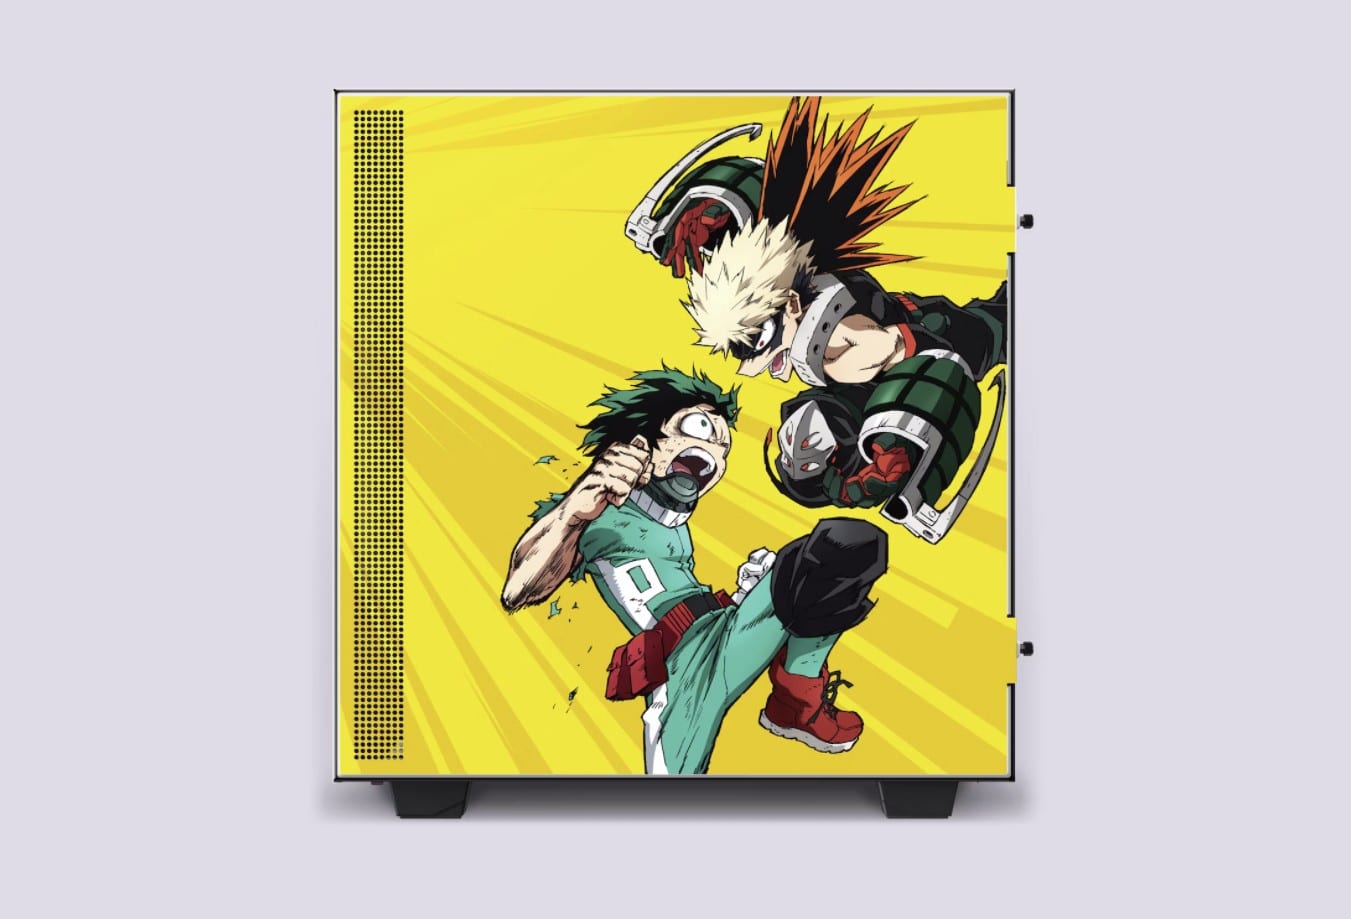 It also comes with the Deku variant in yellow color.